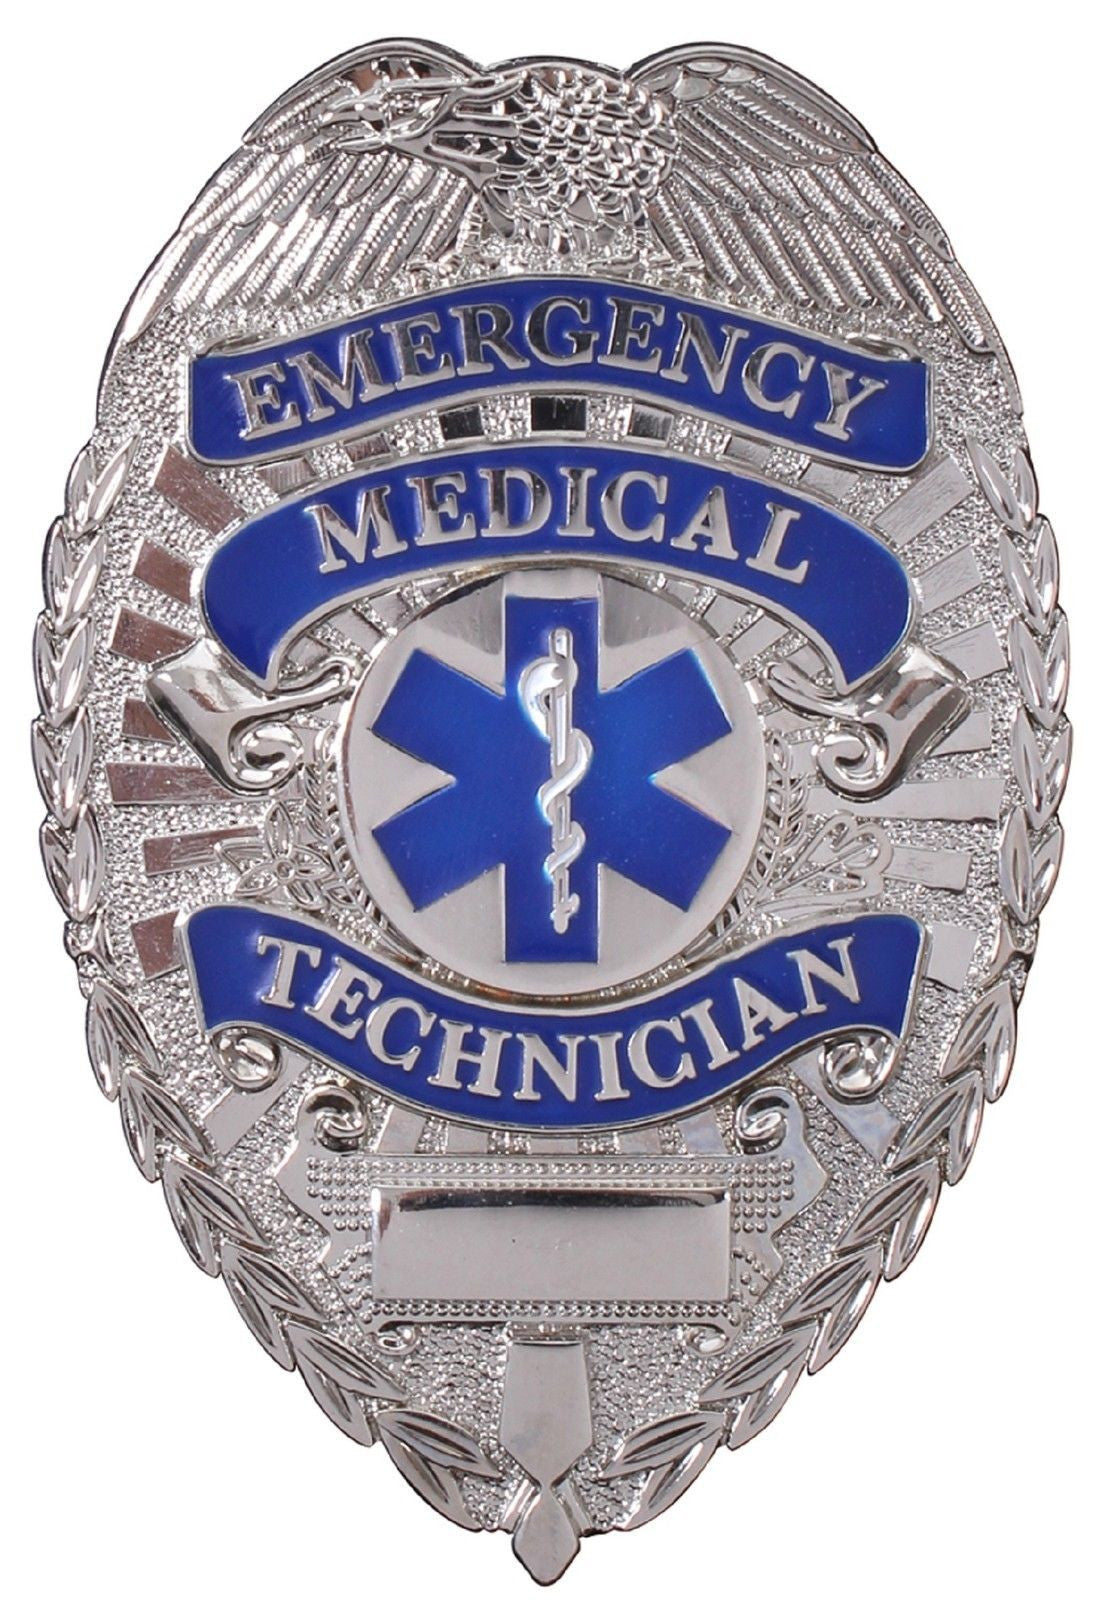 3" Deluxe Nickel-Plated EMT Emergency Medical Technician Badge Rothco Item 1927